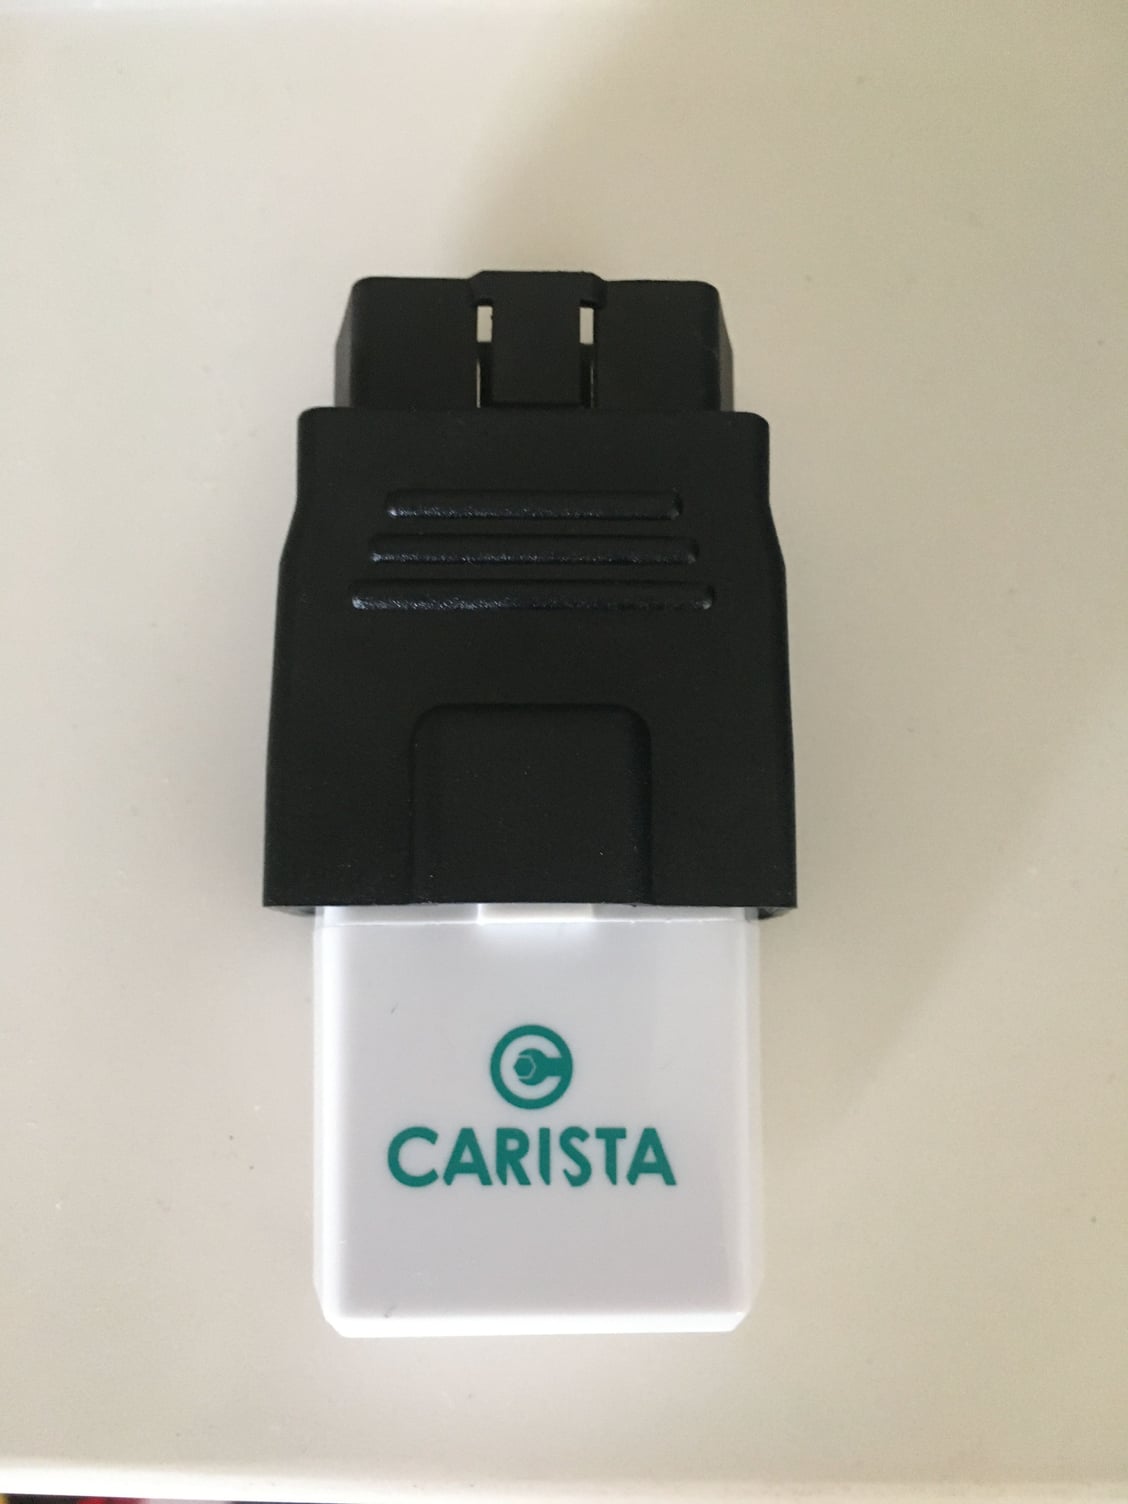 Carista OBD adapter available on  now - AudiWorld Forums